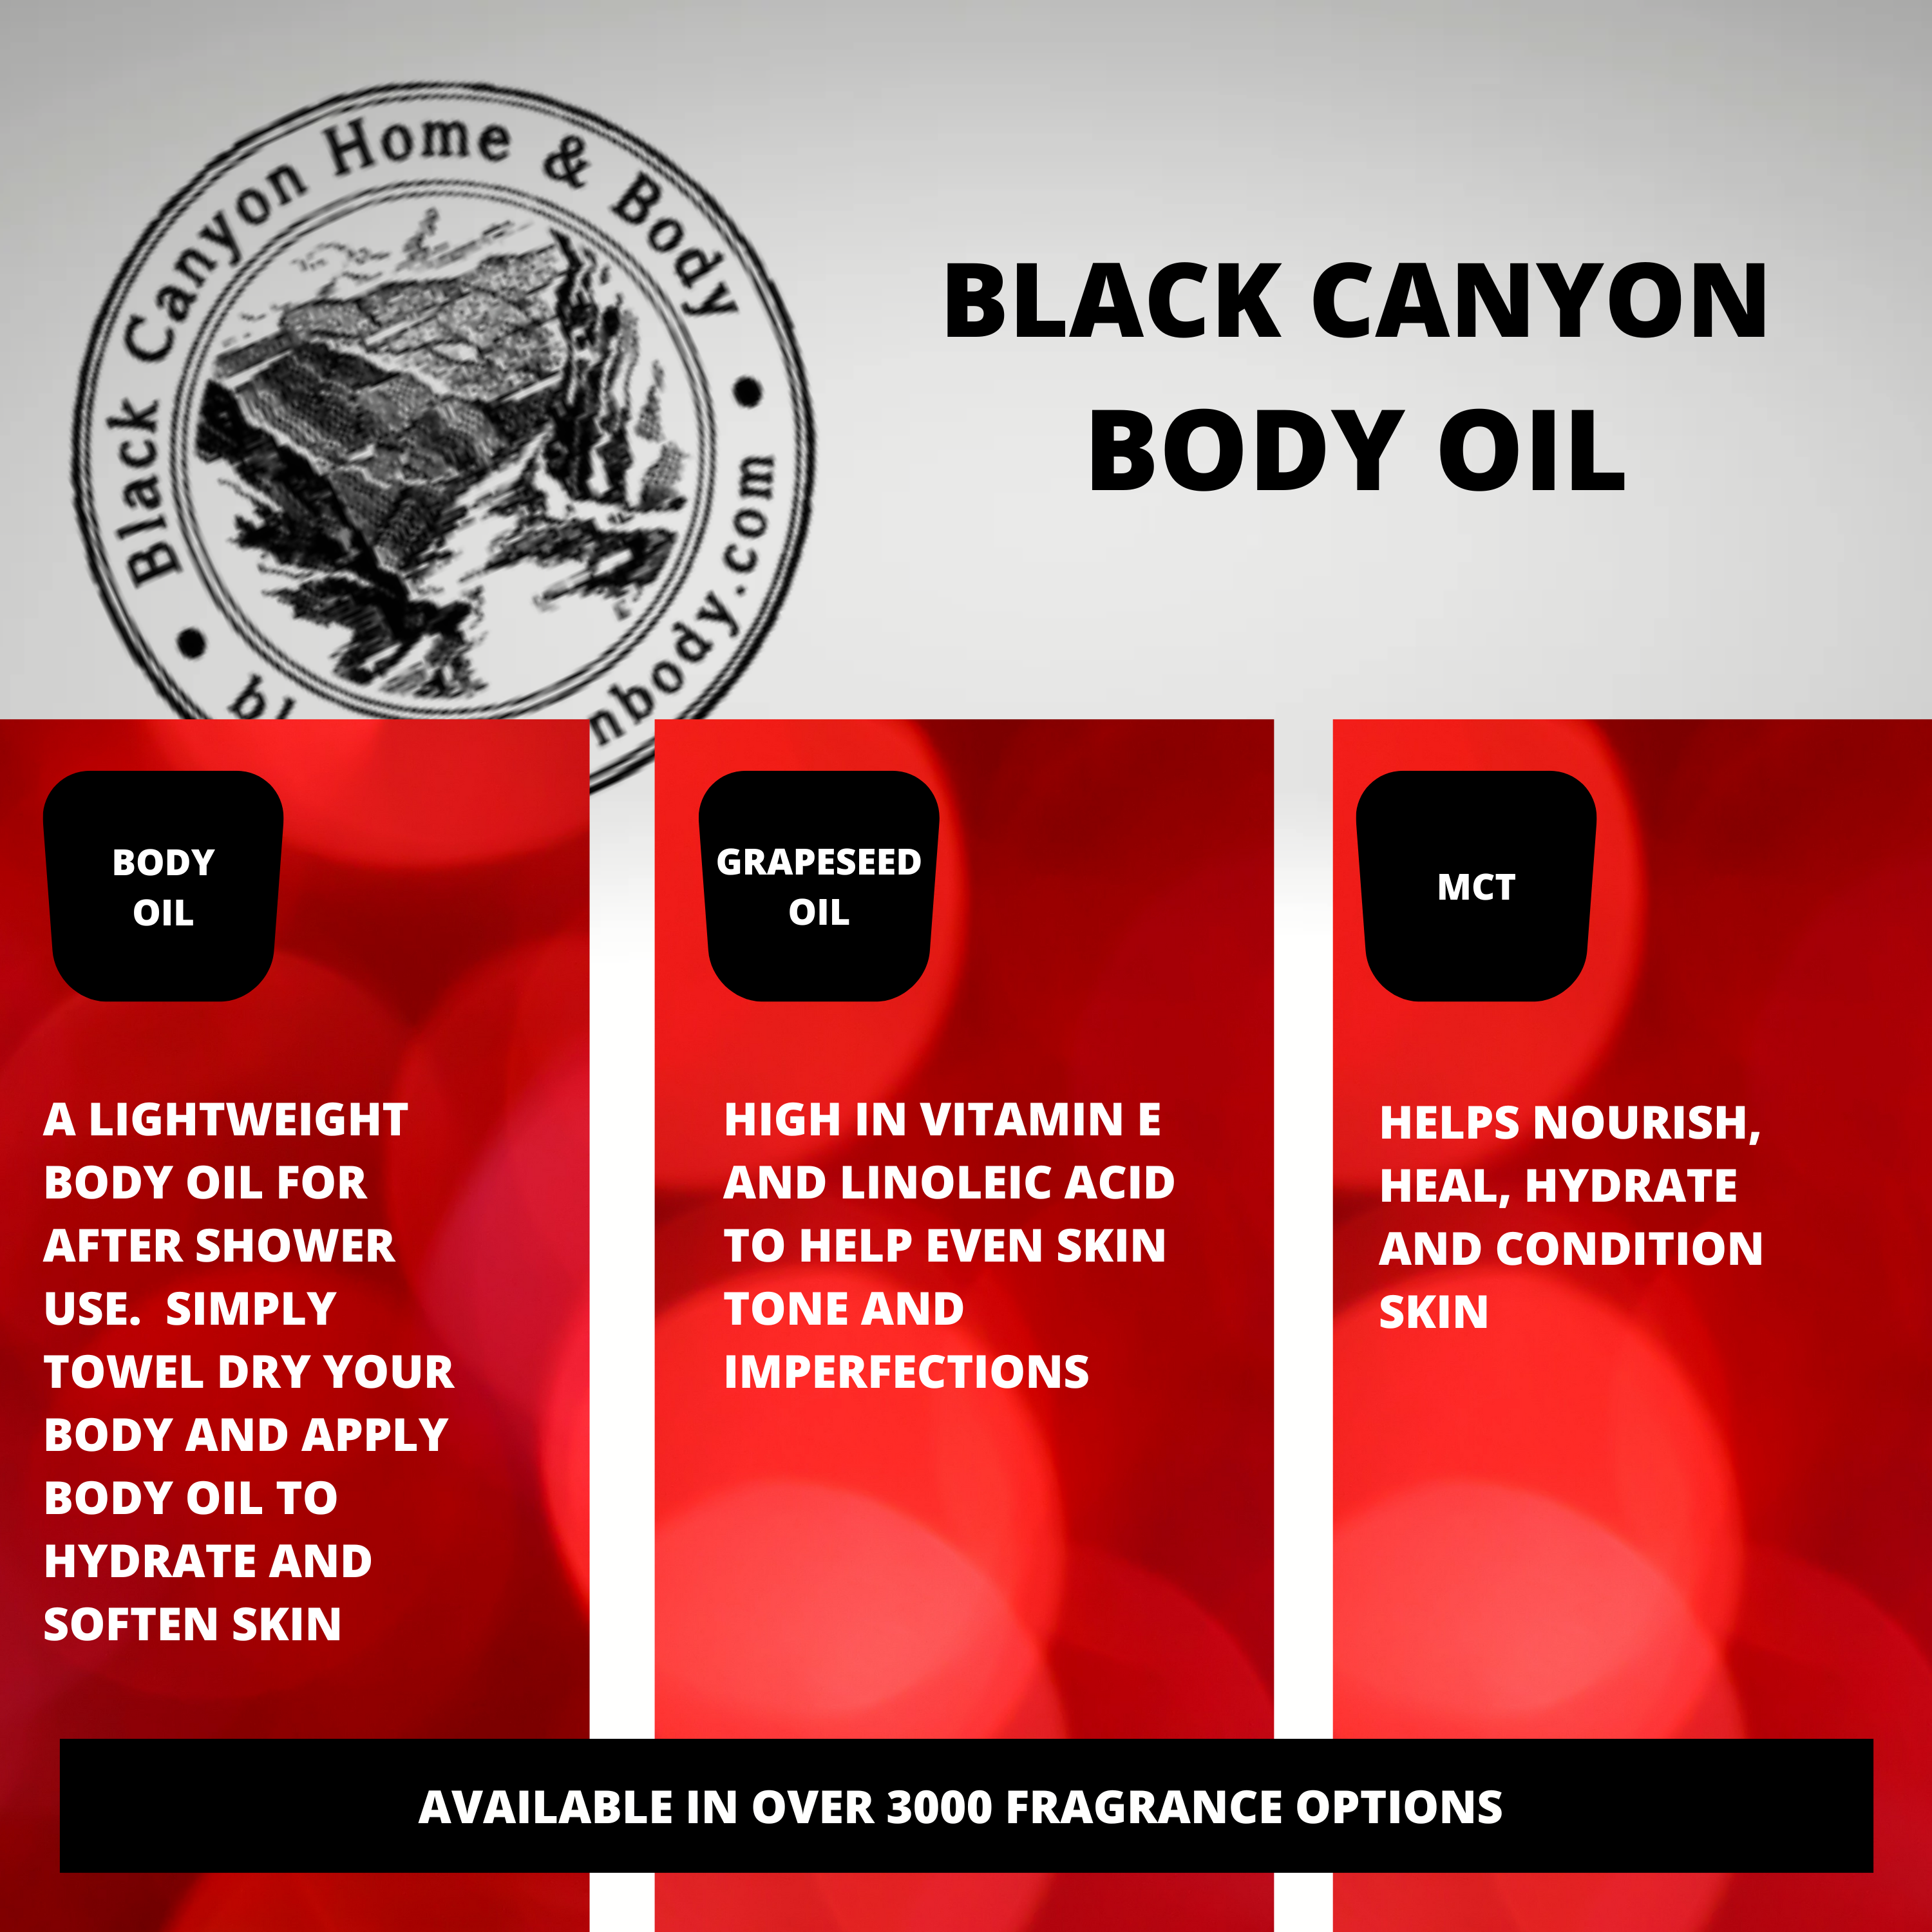 Black Canyon Spiced Vanilla Scented Body Oil